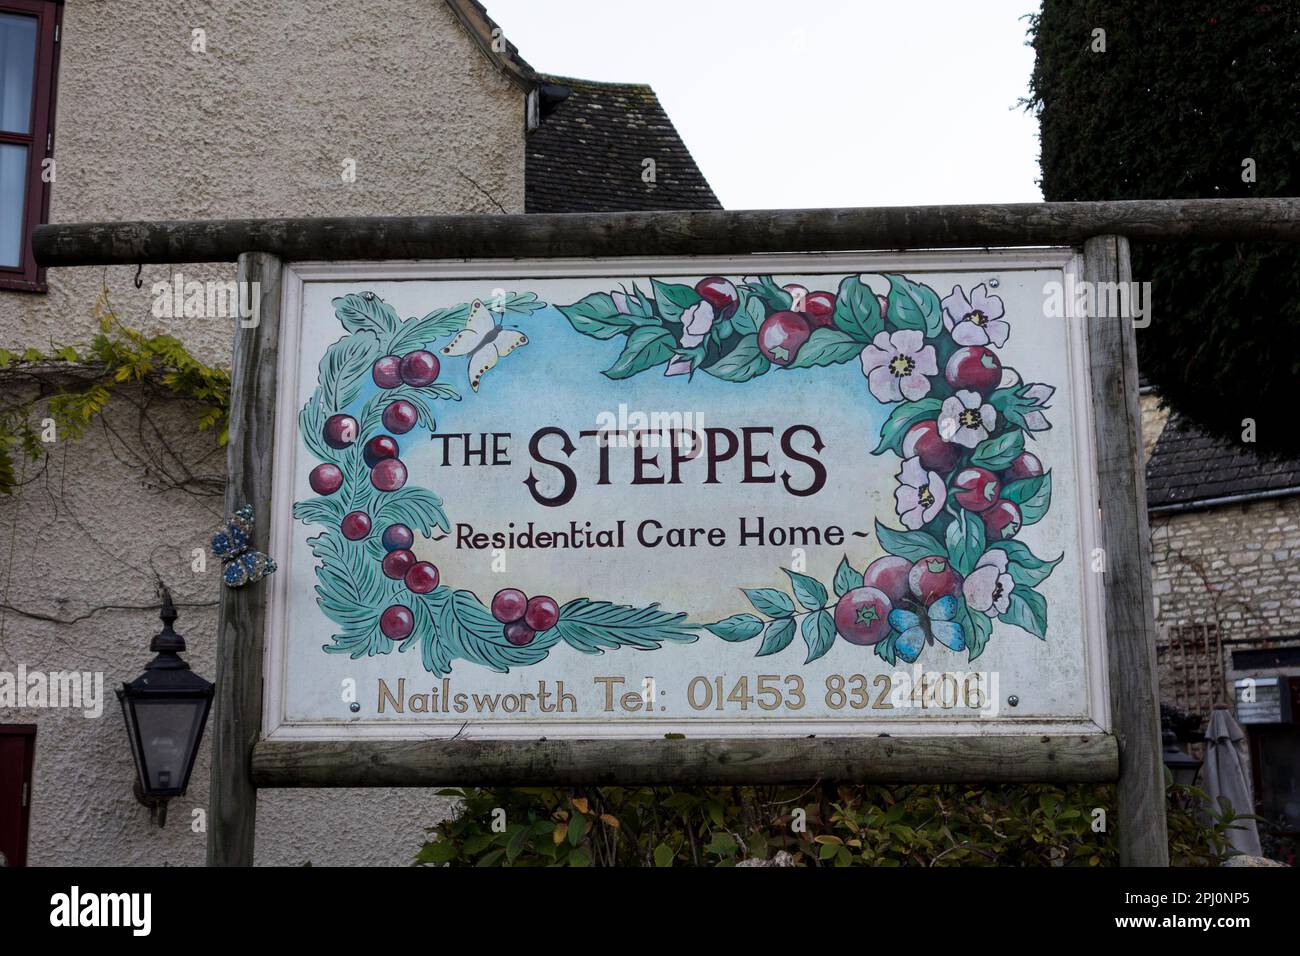 Residential care home sign, Nailsworth, Gloucestershire, UK Stock Photo